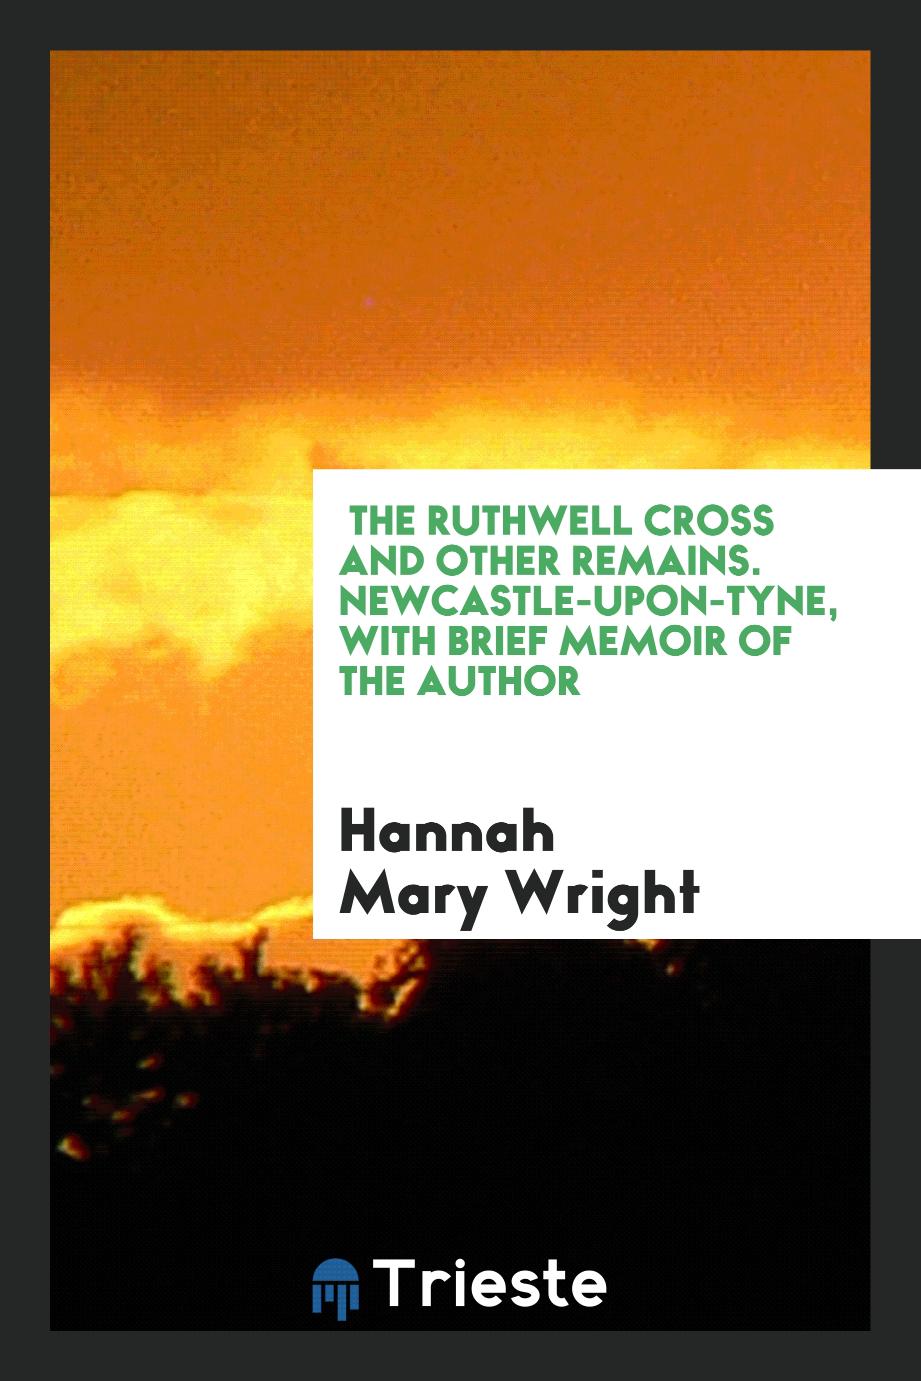 Hannah Mary Wright - The Ruthwell Cross and Other Remains. Newcastle-Upon-Tyne, with Brief Memoir of the Author